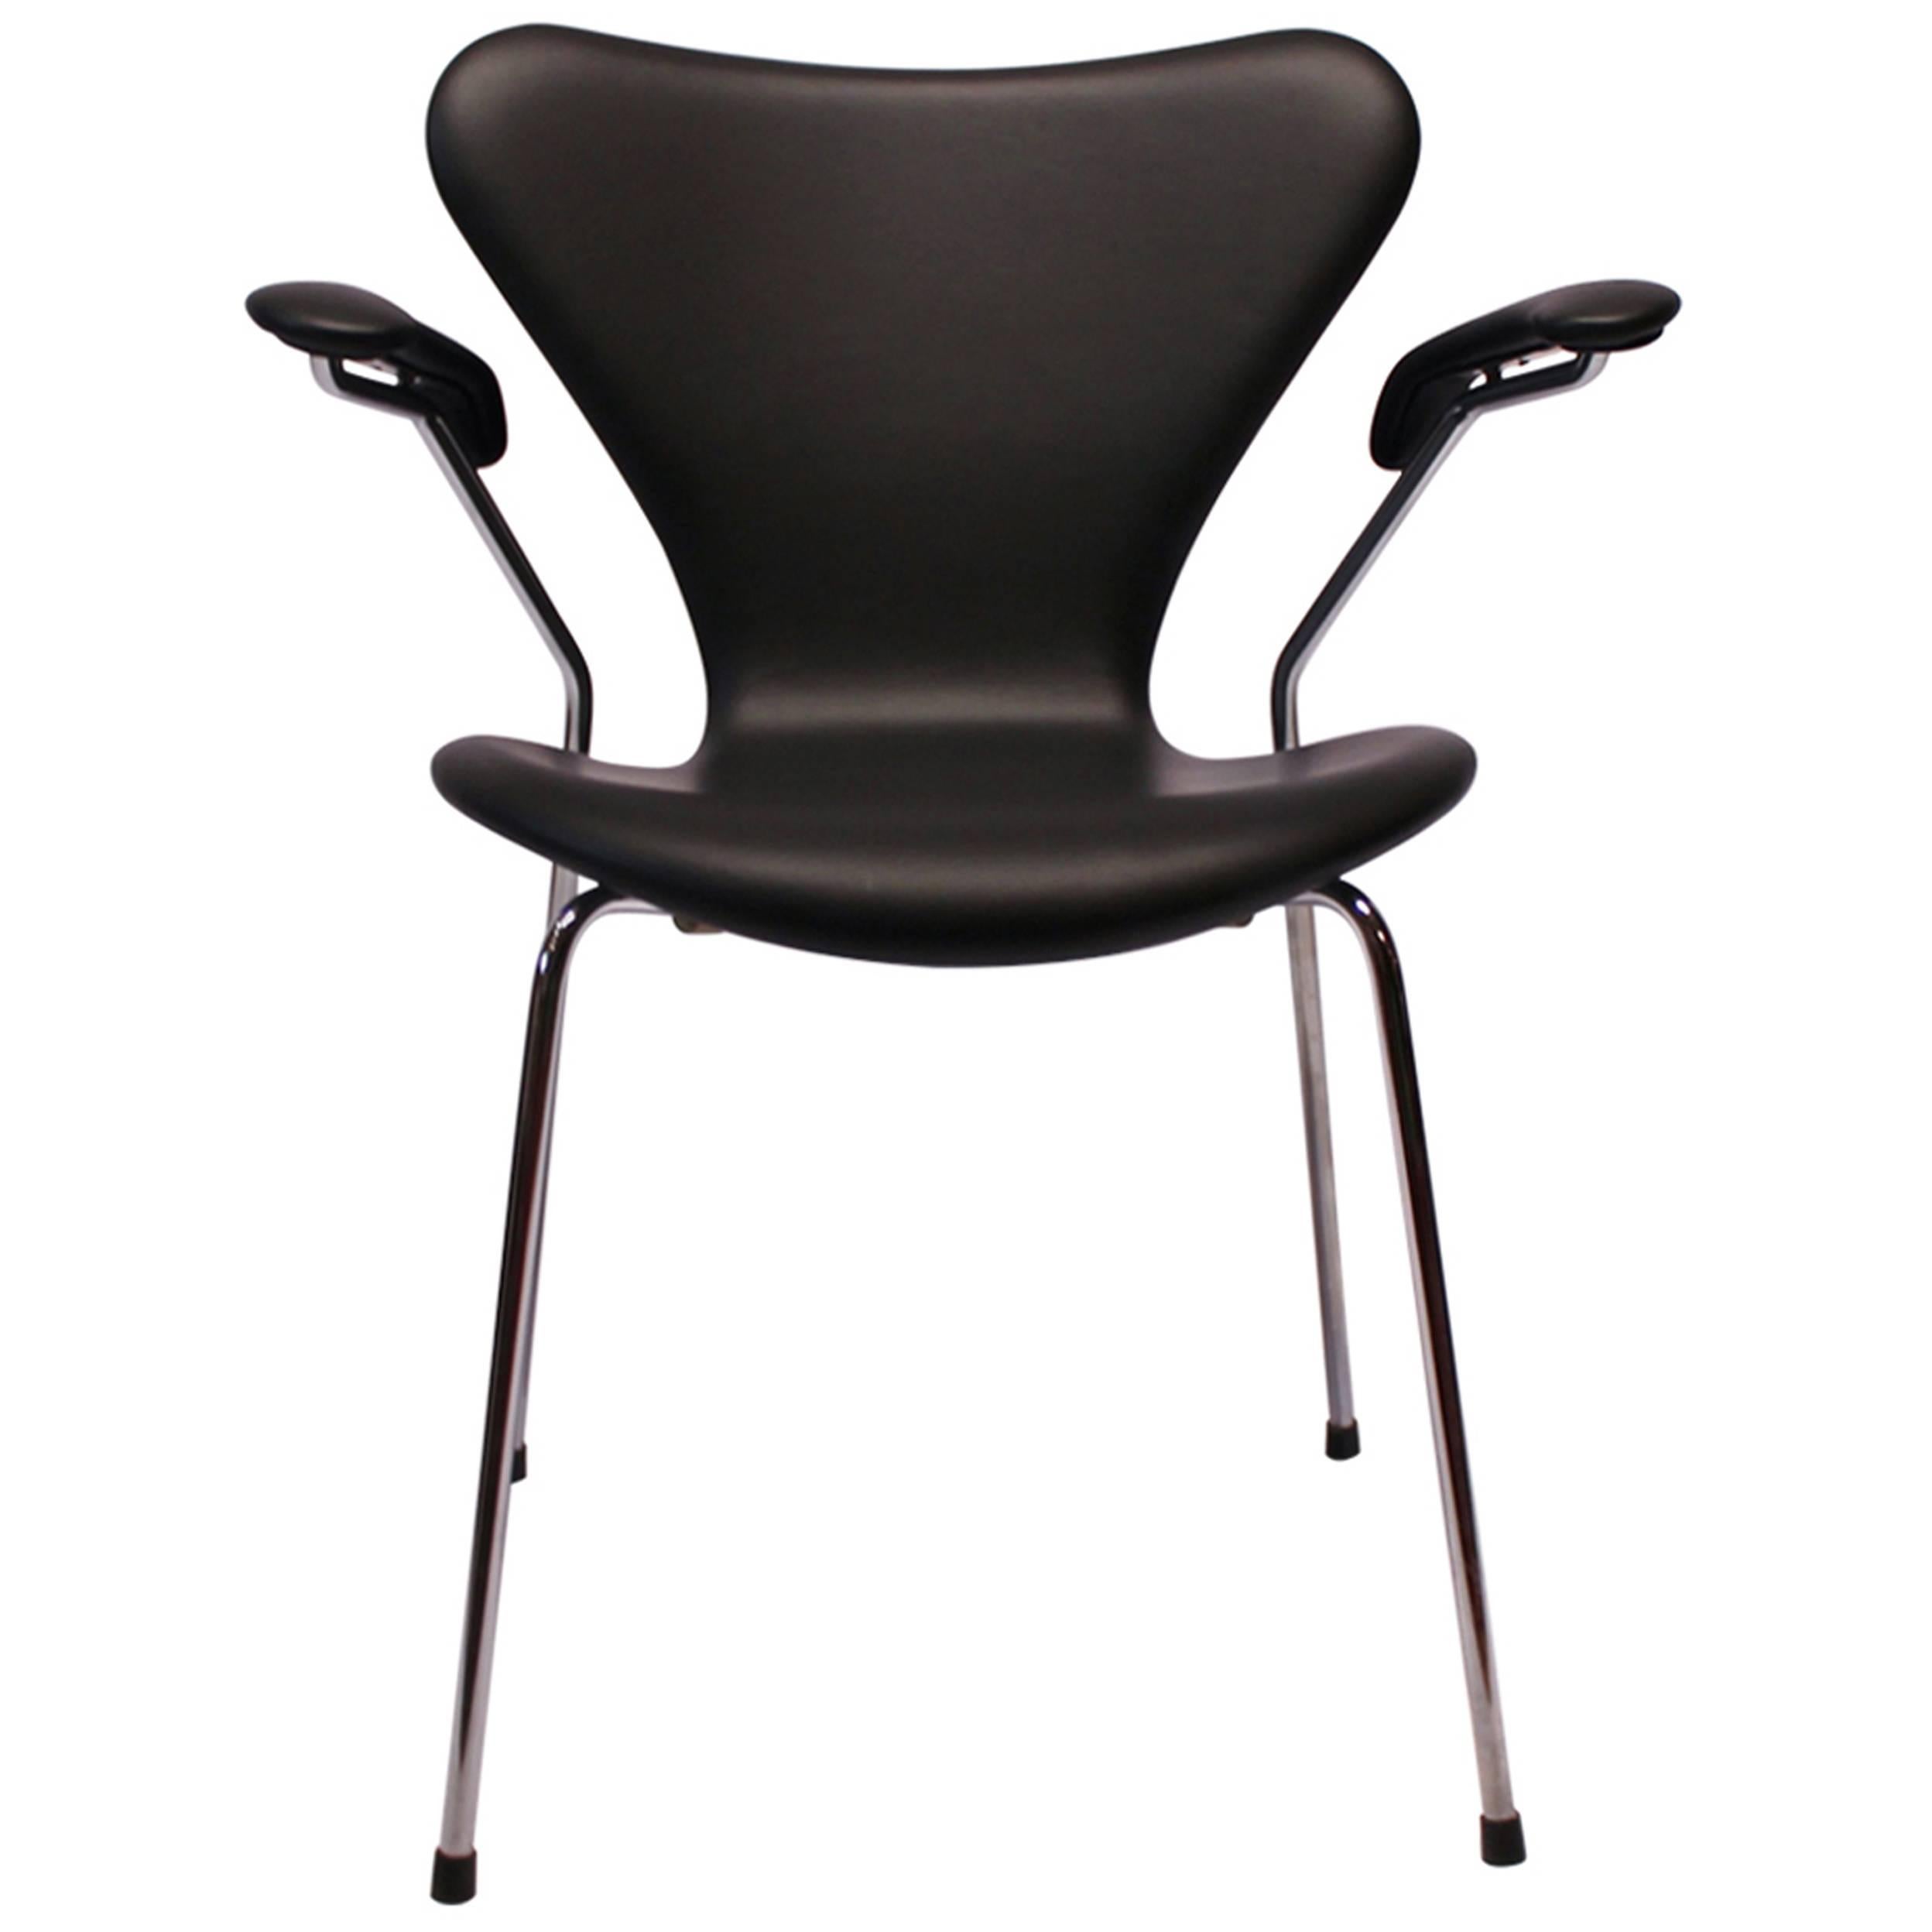 Seven Chair, Model 3207, with Armrest in Black Classic Leather by Arne Jacobsen